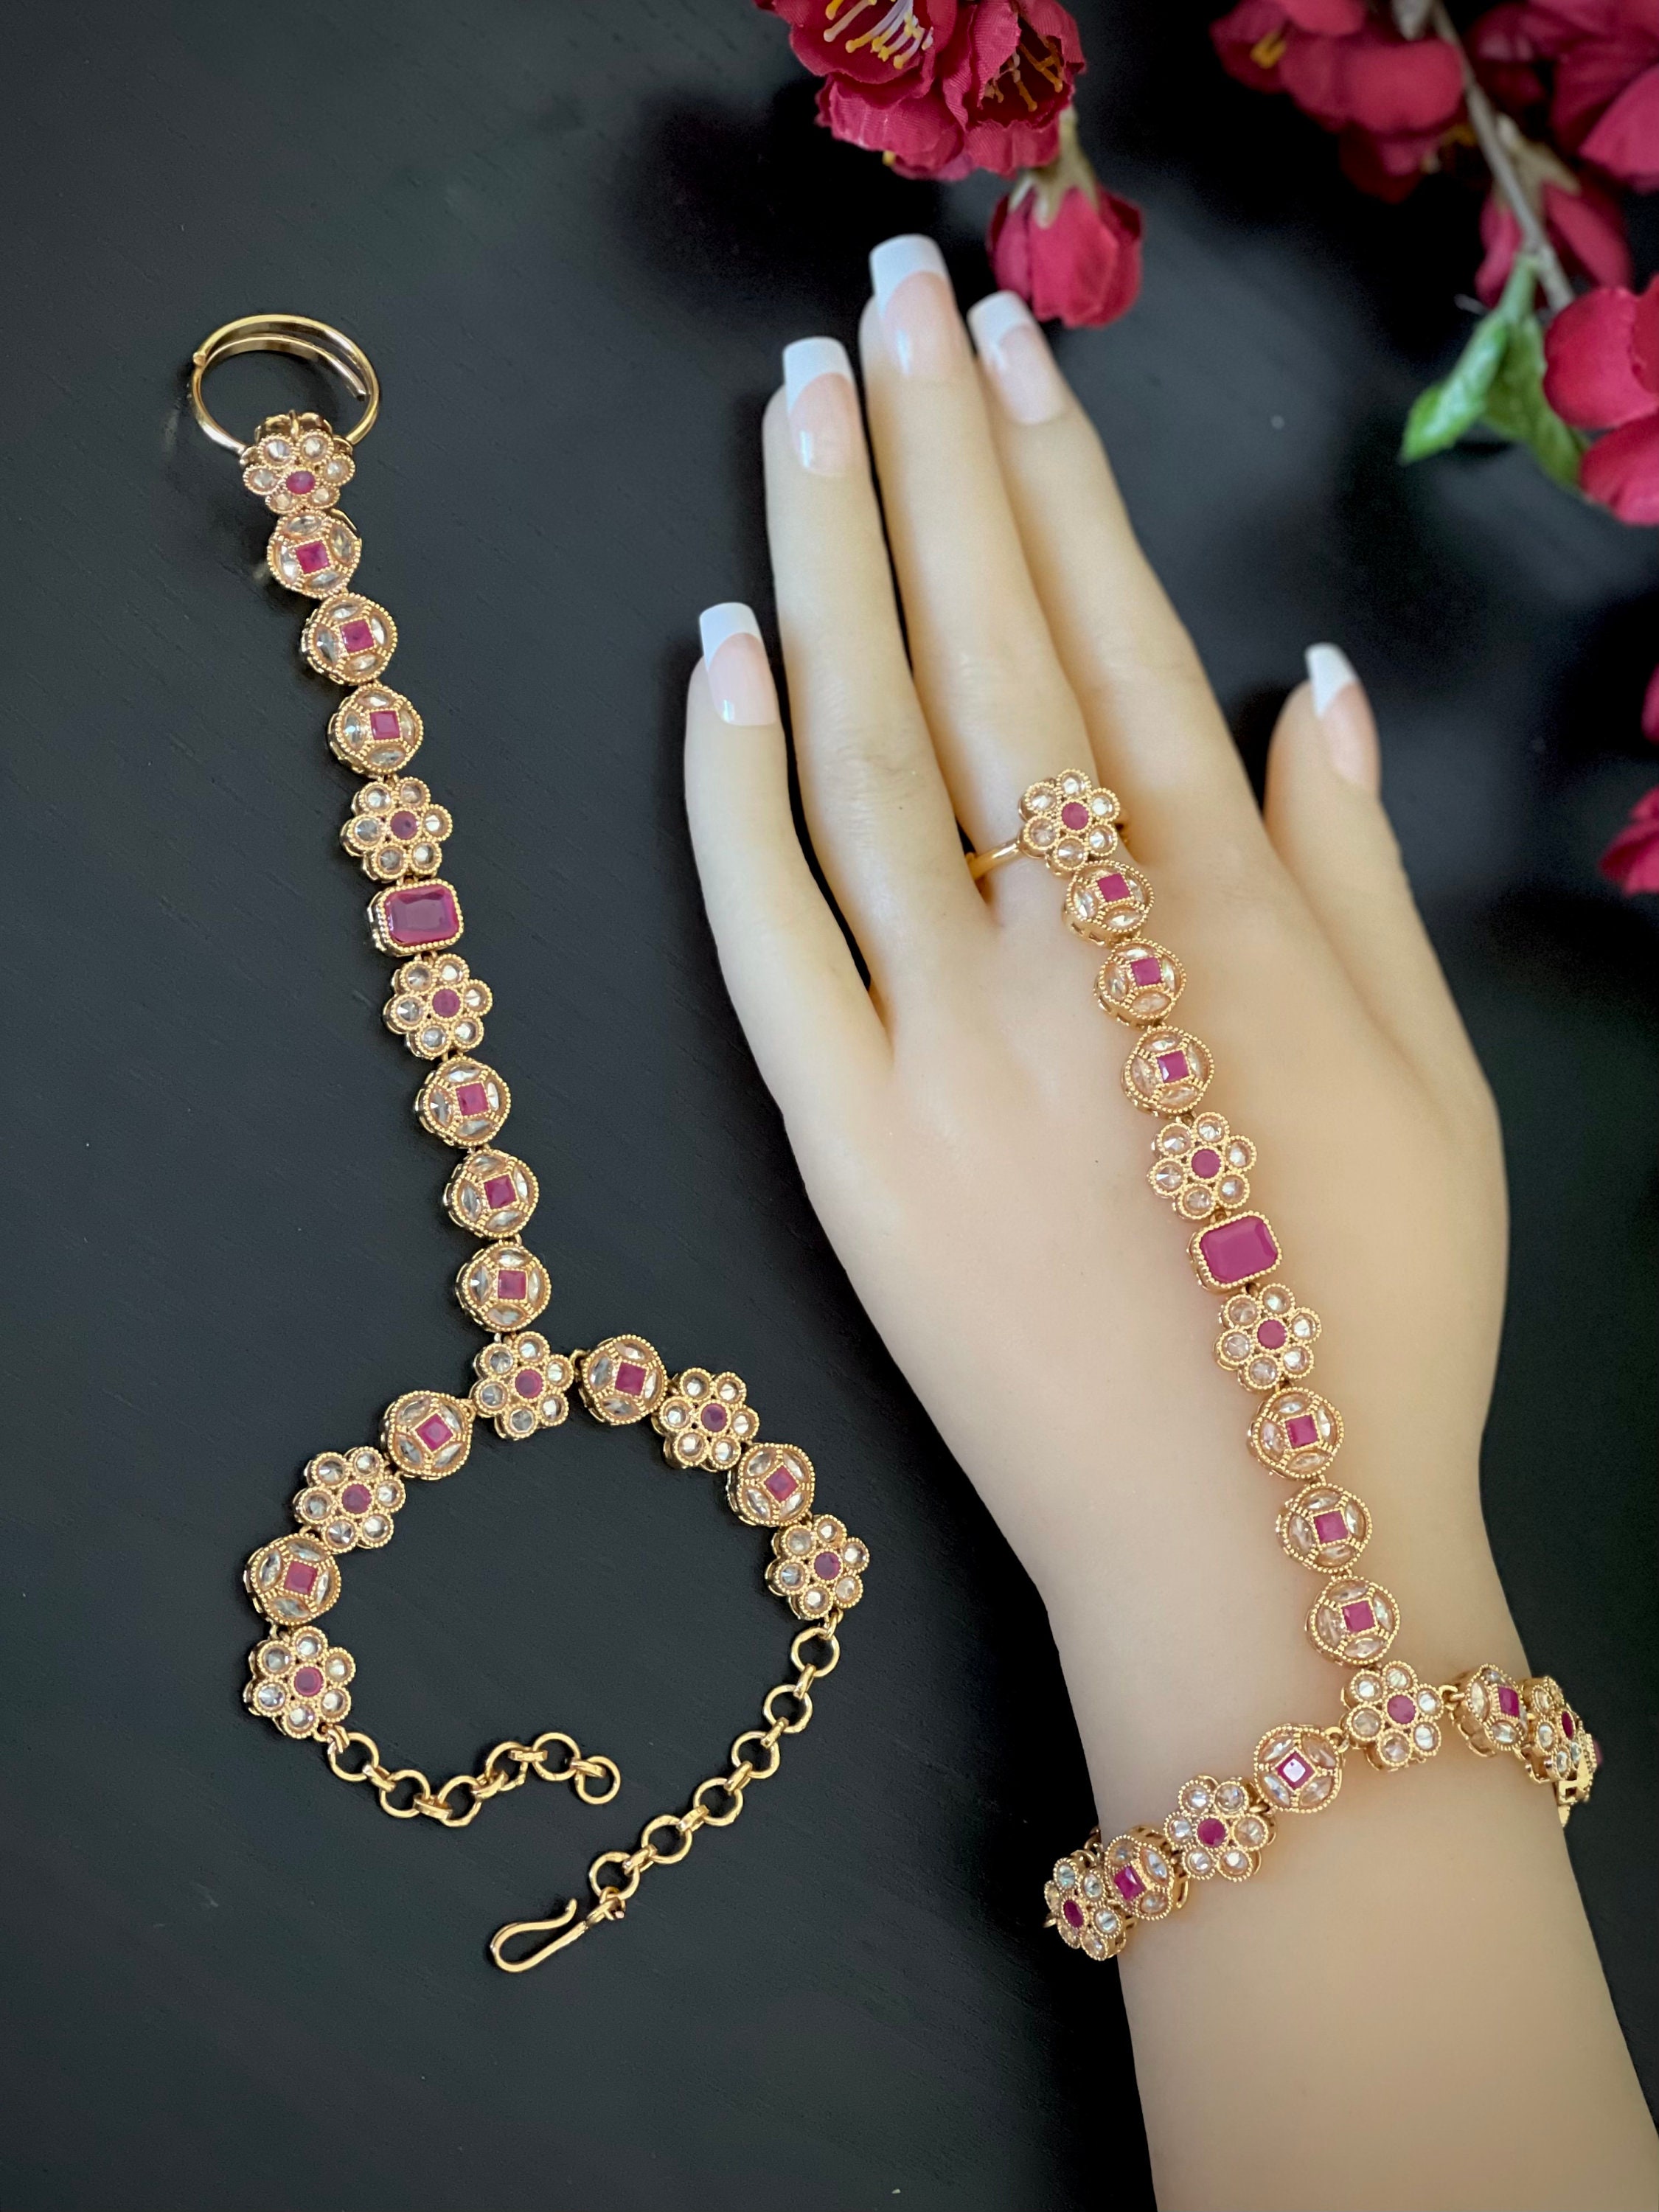 Buy Kabello Golden Rhinestone Jewellery Set Anklet with Ring Bracelet for  Women Online at Lowest Price Ever in India | Check Reviews & Ratings - Shop  The World